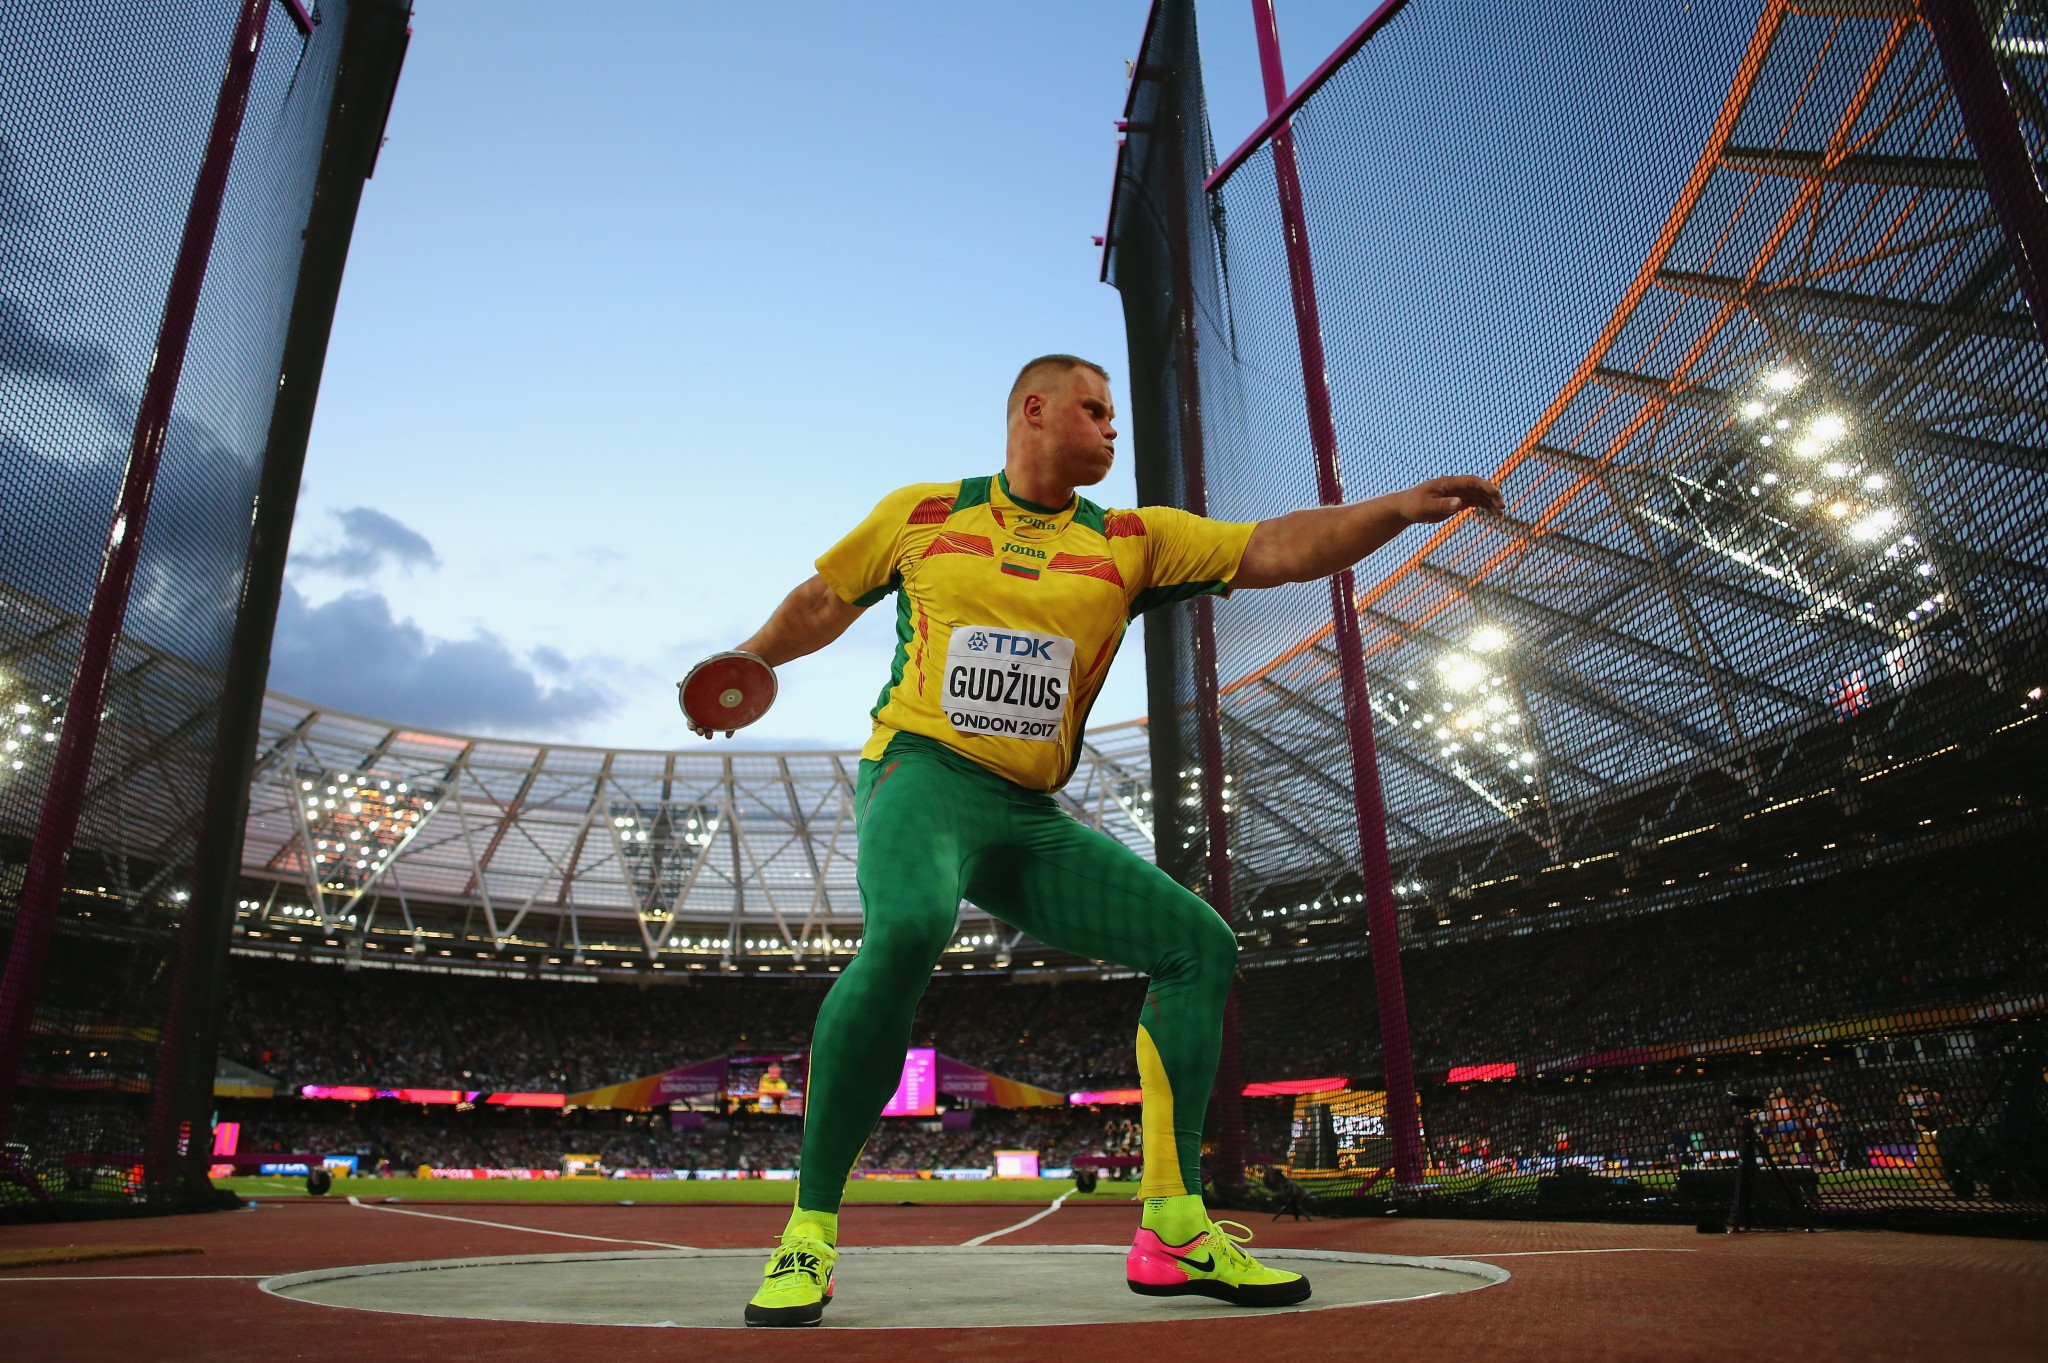 Lithuana's Andrius Gudzius won the discus by two centimetres ©Getty Images